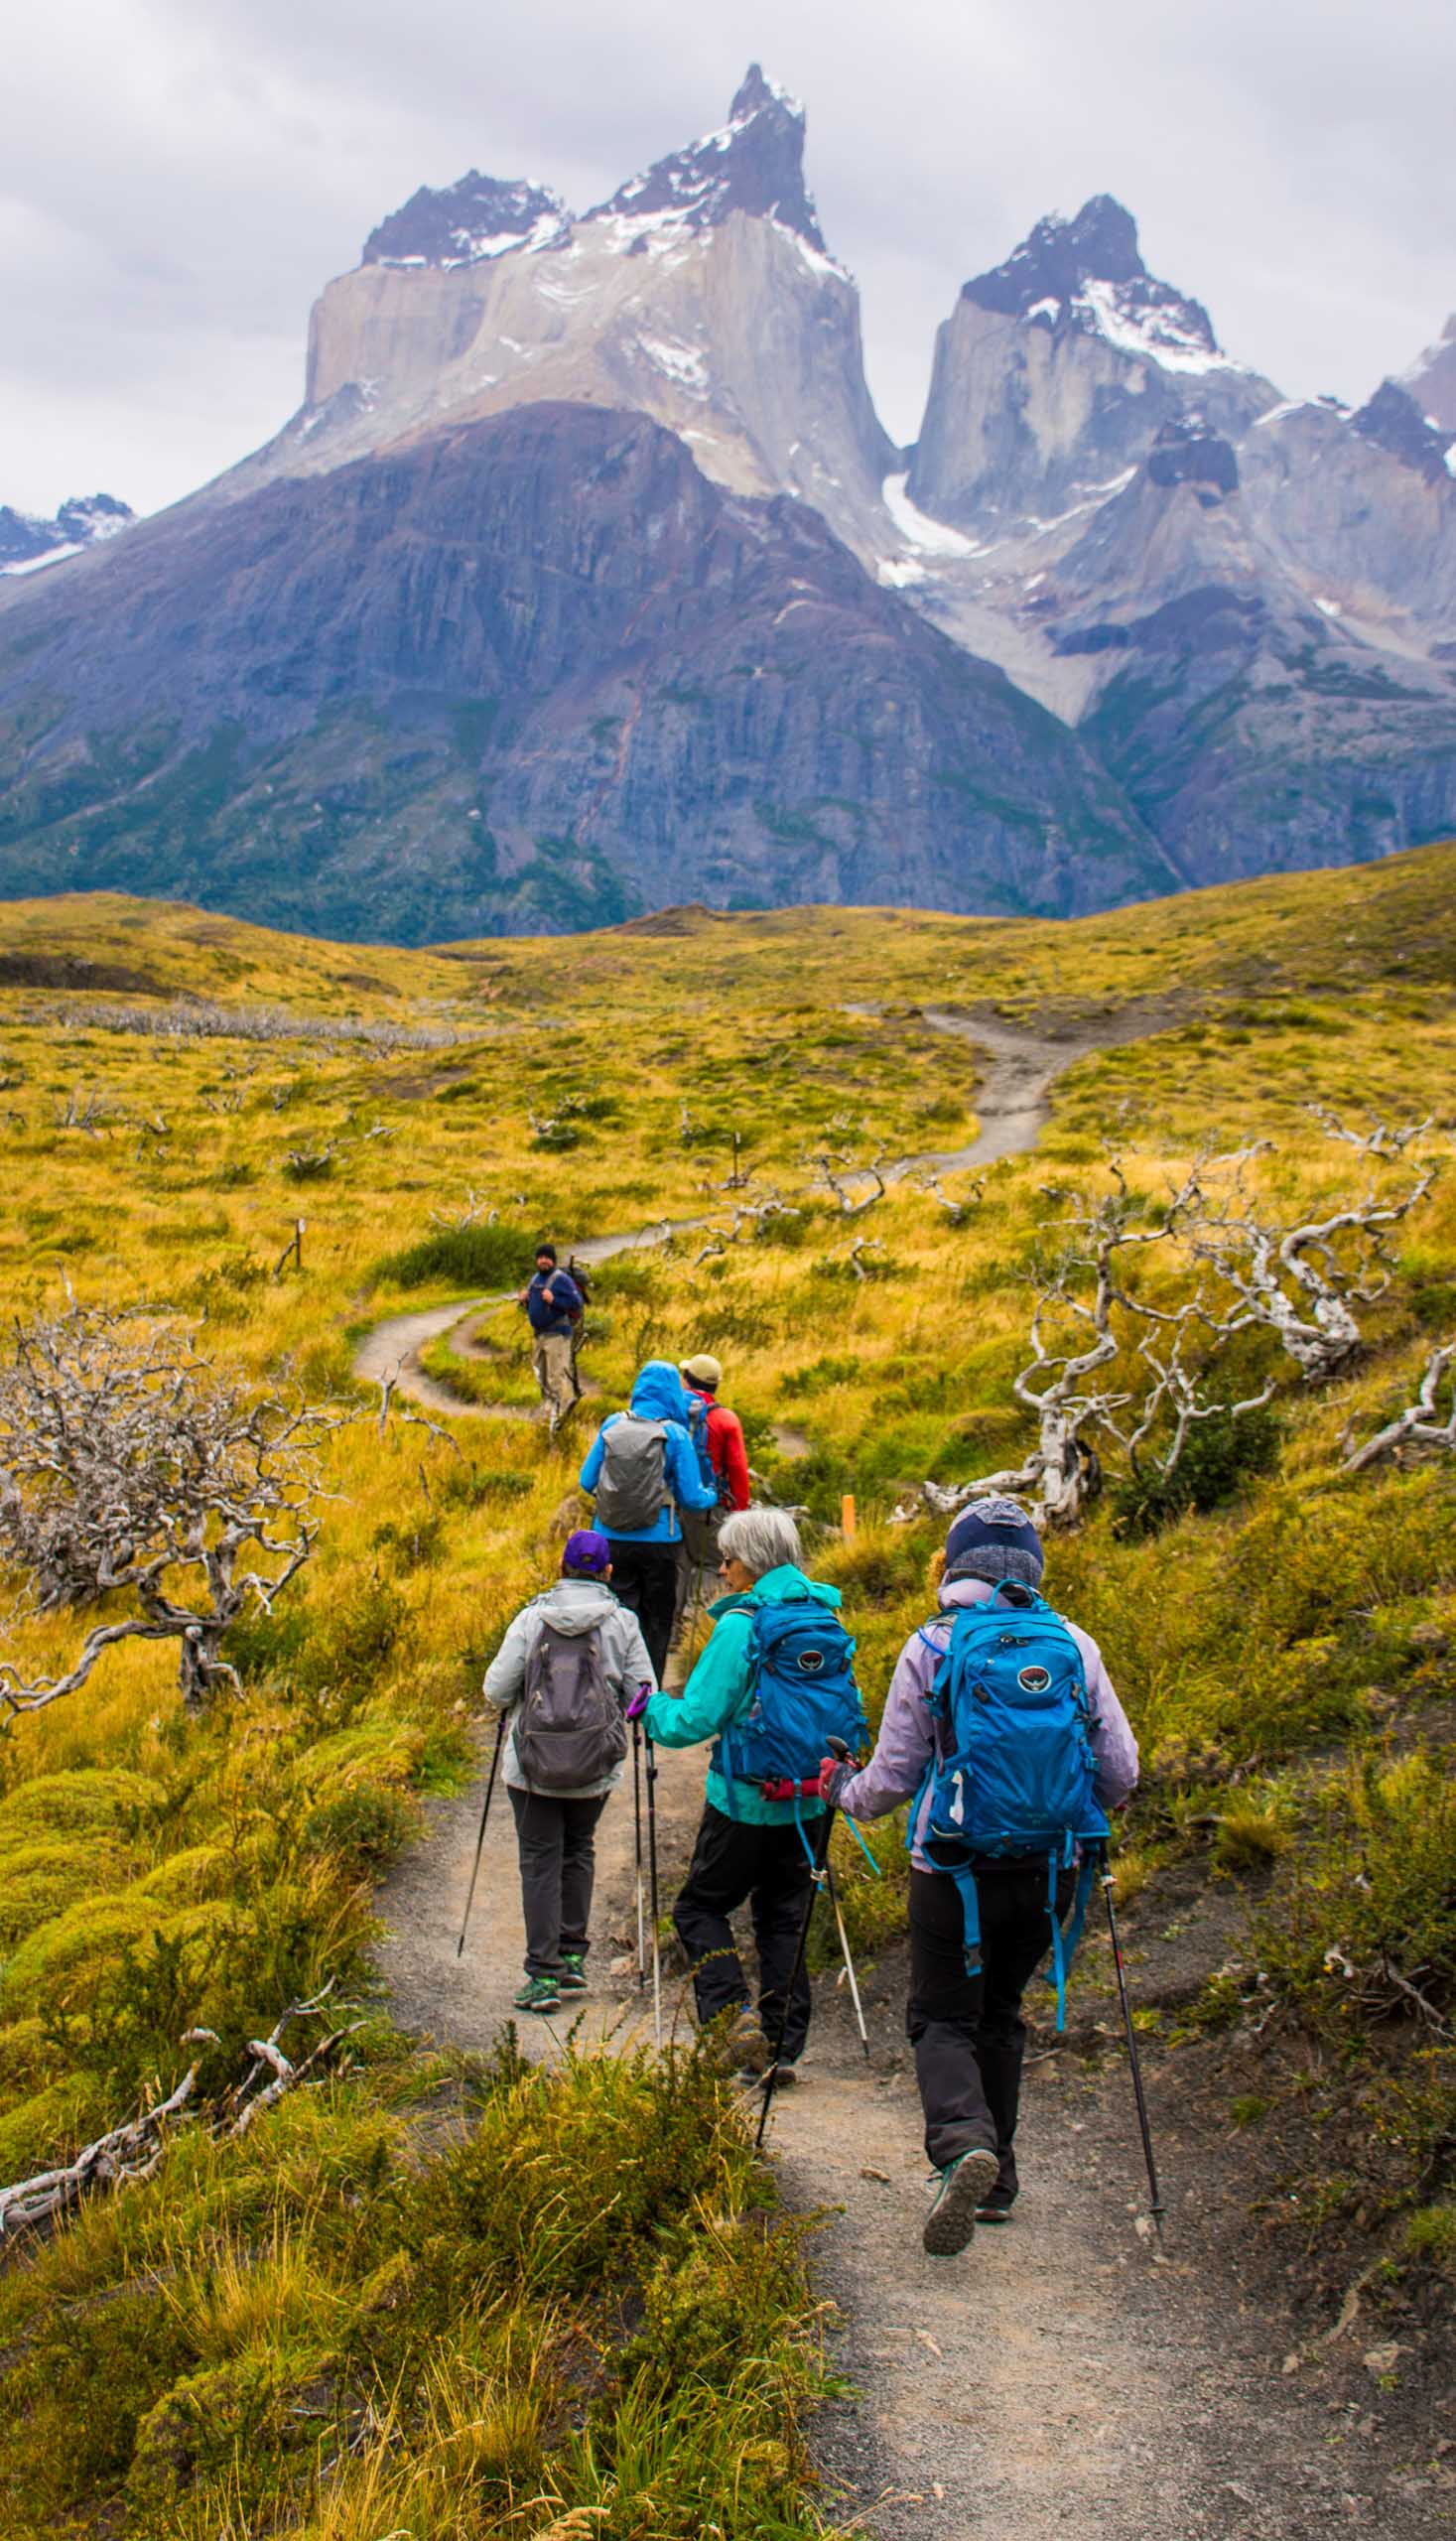 A group of people hiking in Chile.